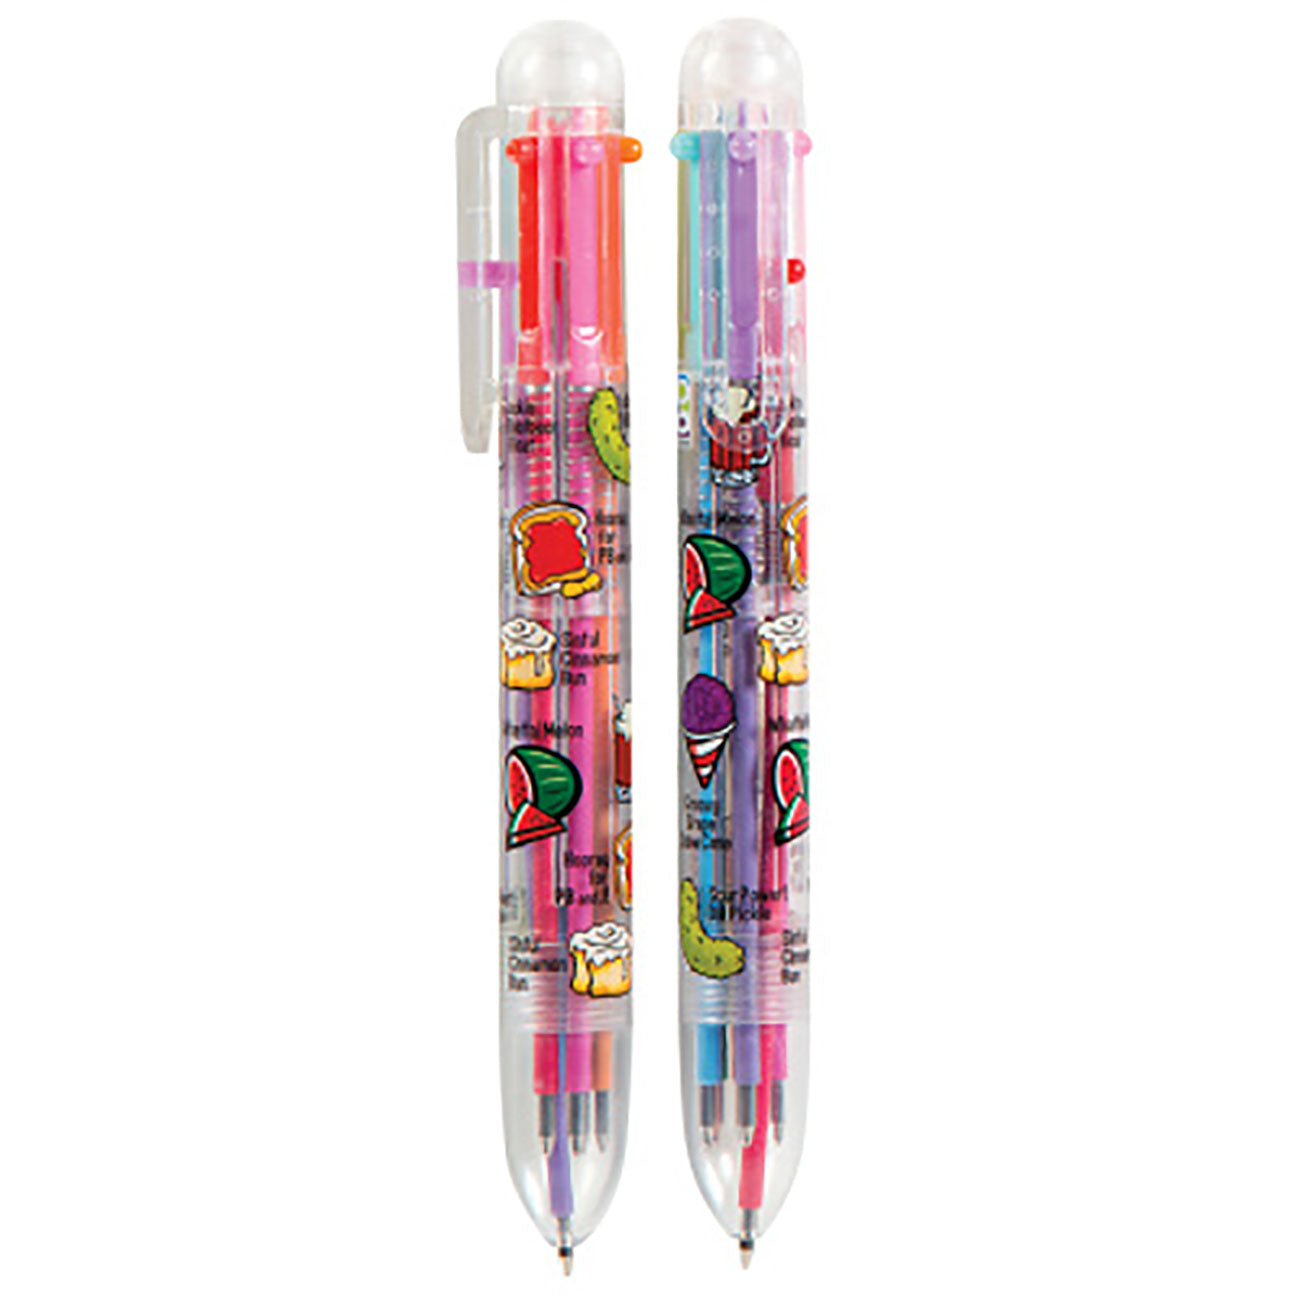 Set of 2 - Scented Cute Multiple Tip Colored Pens - Pet & Food Shuttle Pen with 6 Different Colored Ink options - Fidget - Anxiety Adhd